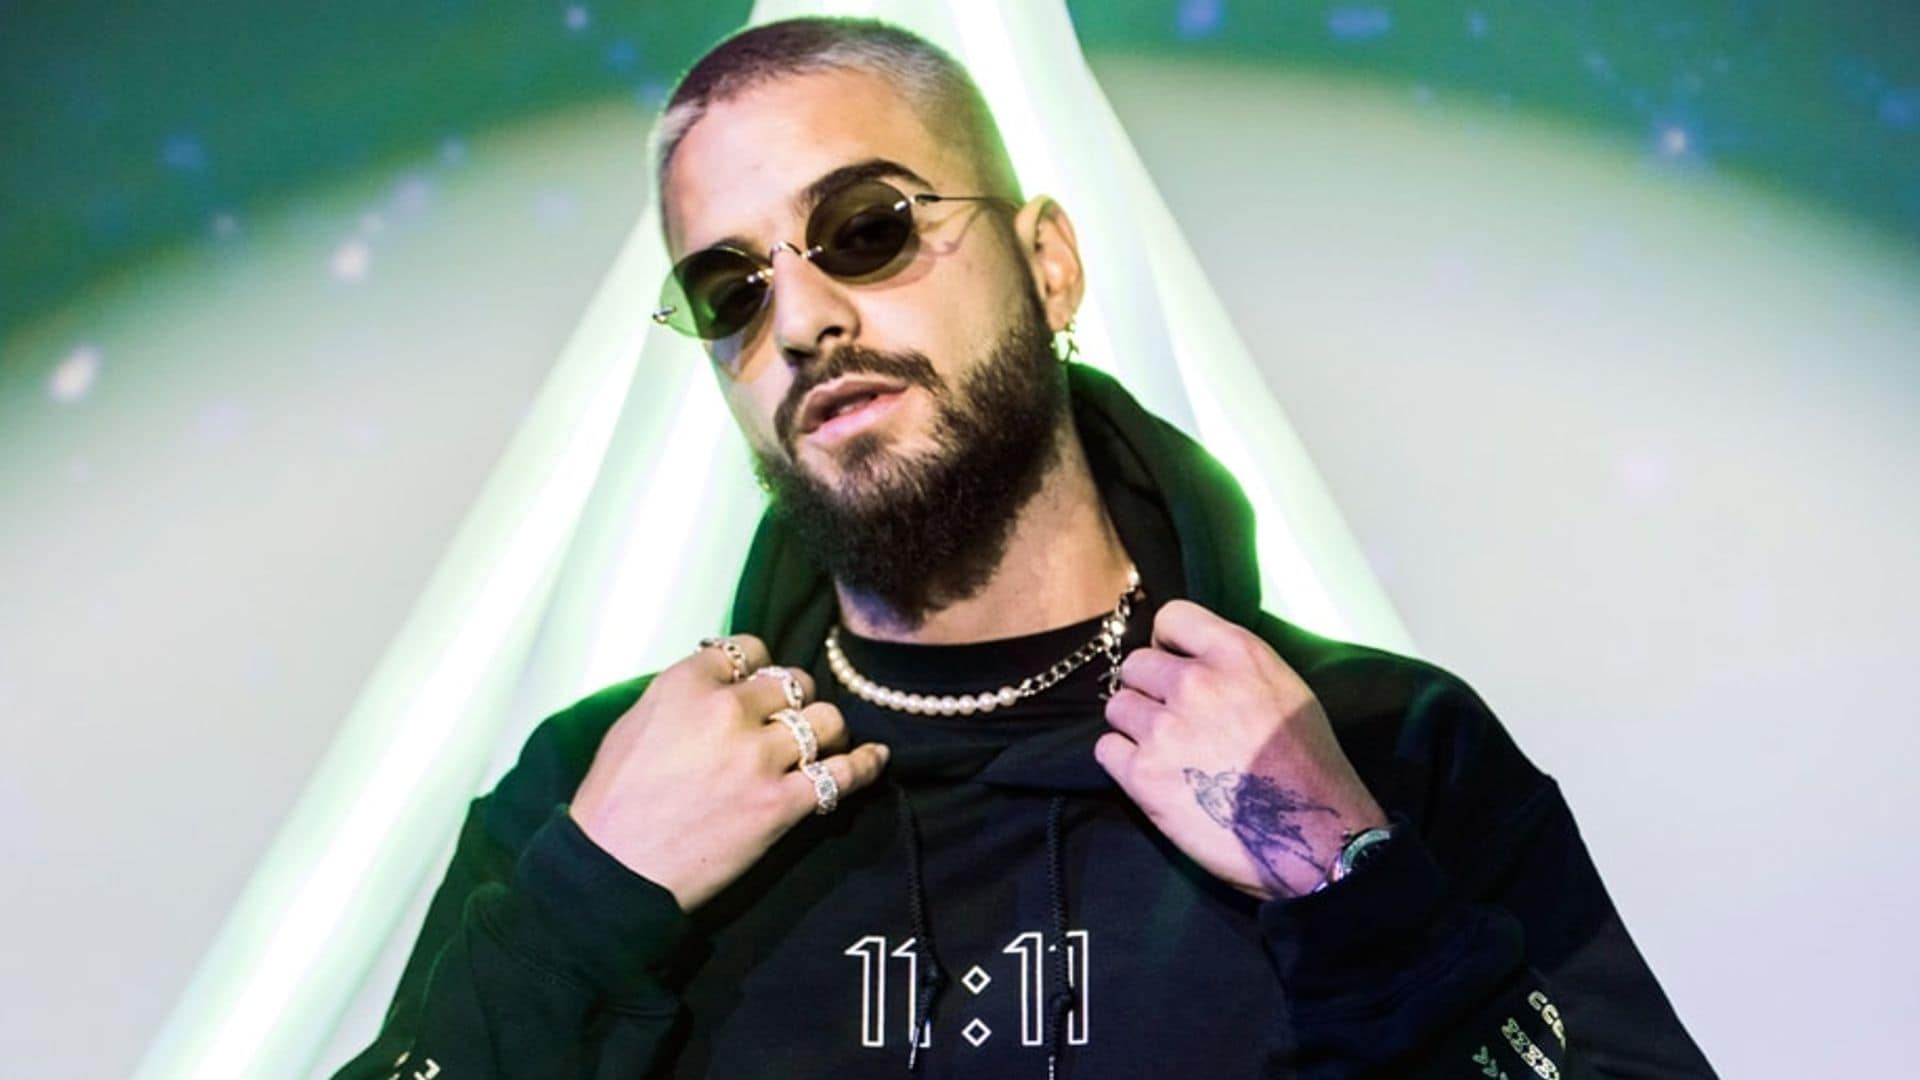 Watch the controversial video that made Maluma quit the Internet